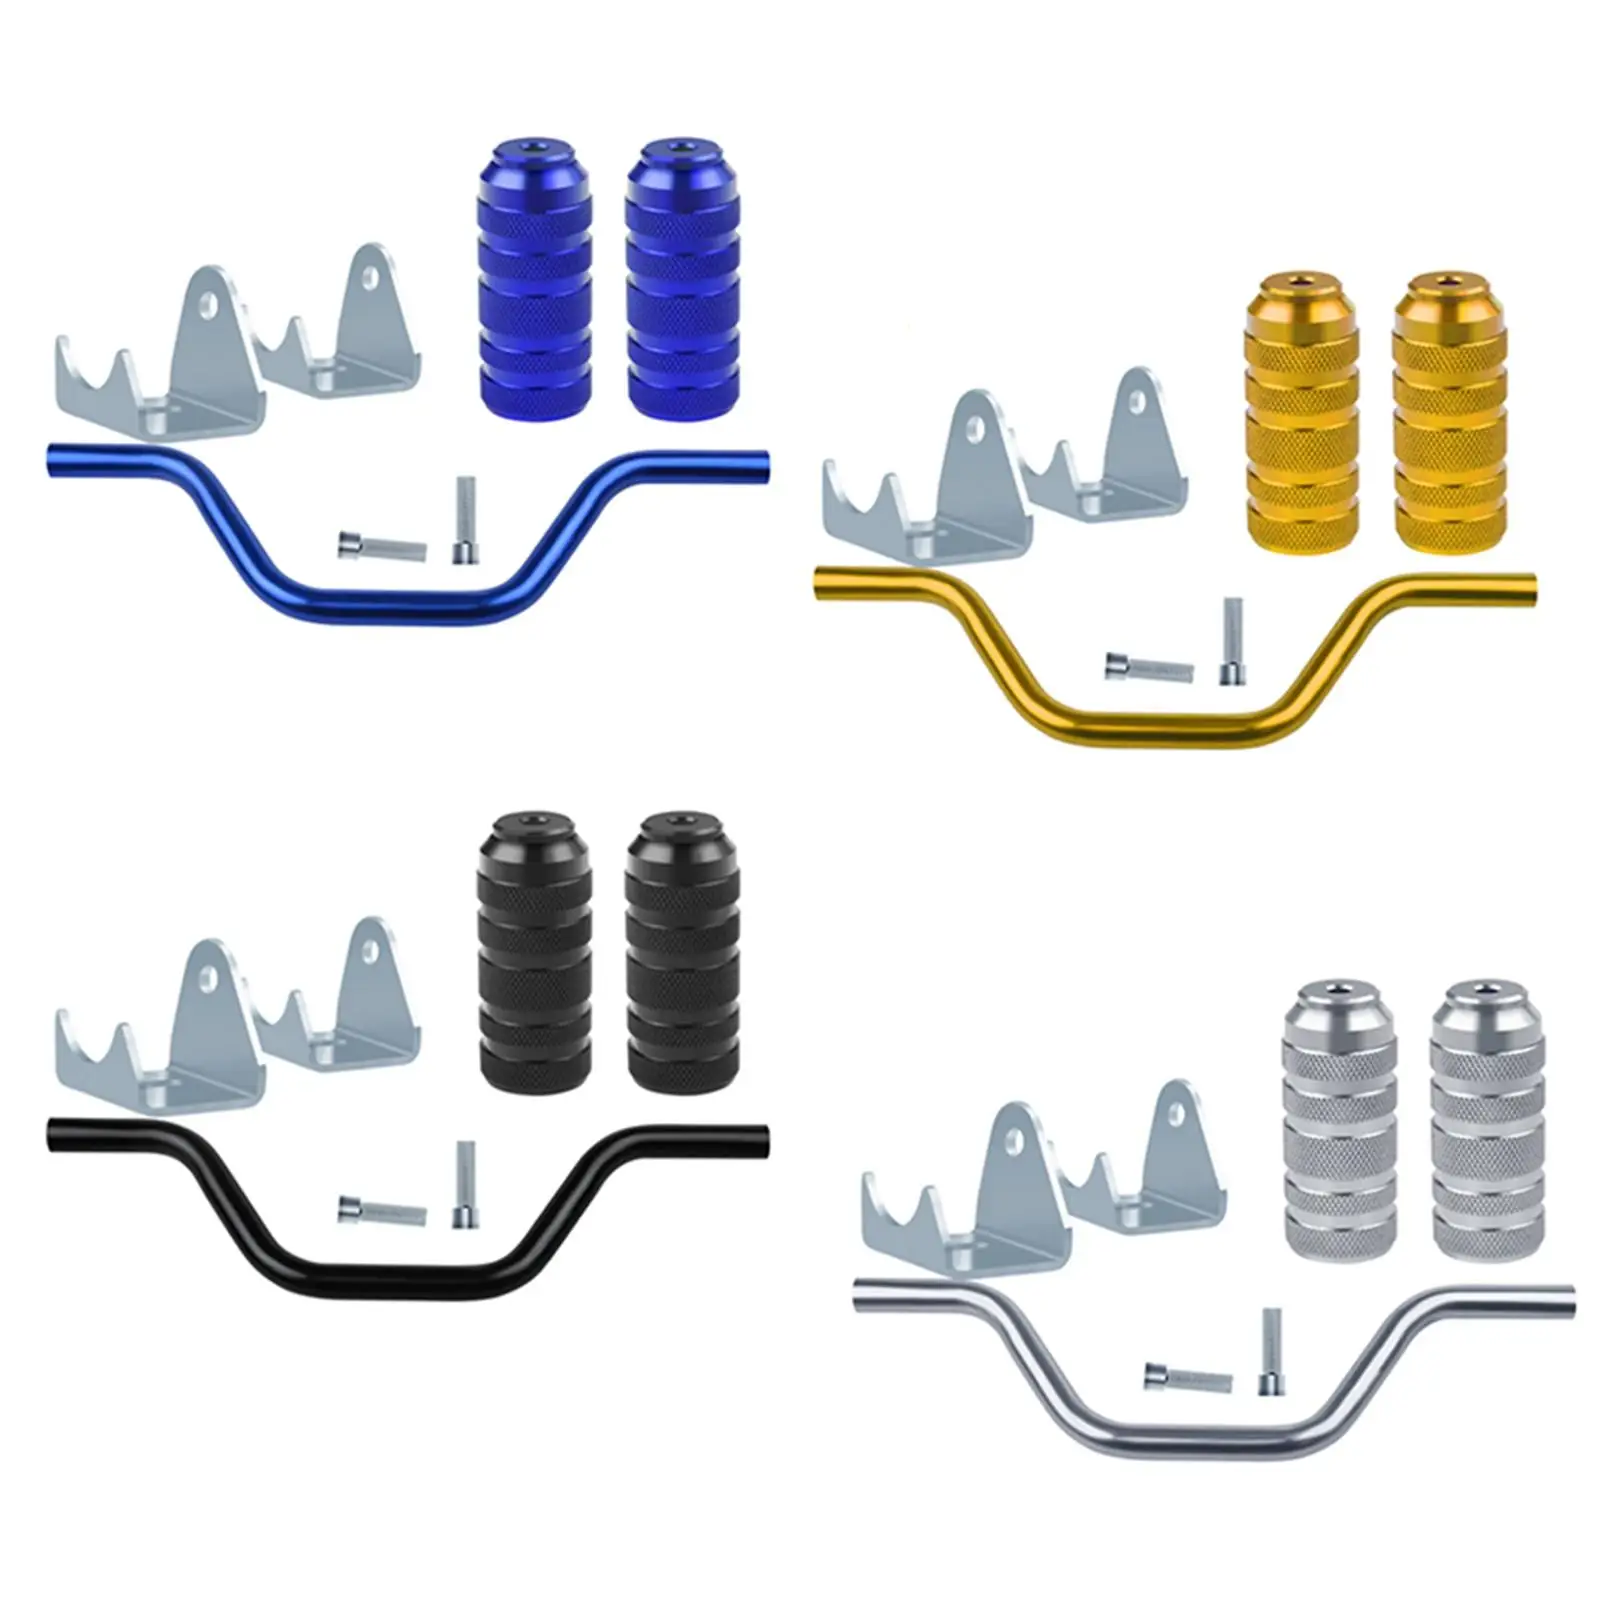 Universal Motorcycle Foot Pegs Pedals, Elbow Pedal Lever CNC Footpegs Foot Rests/ Fit for Scooter Dirt Bike UTV/